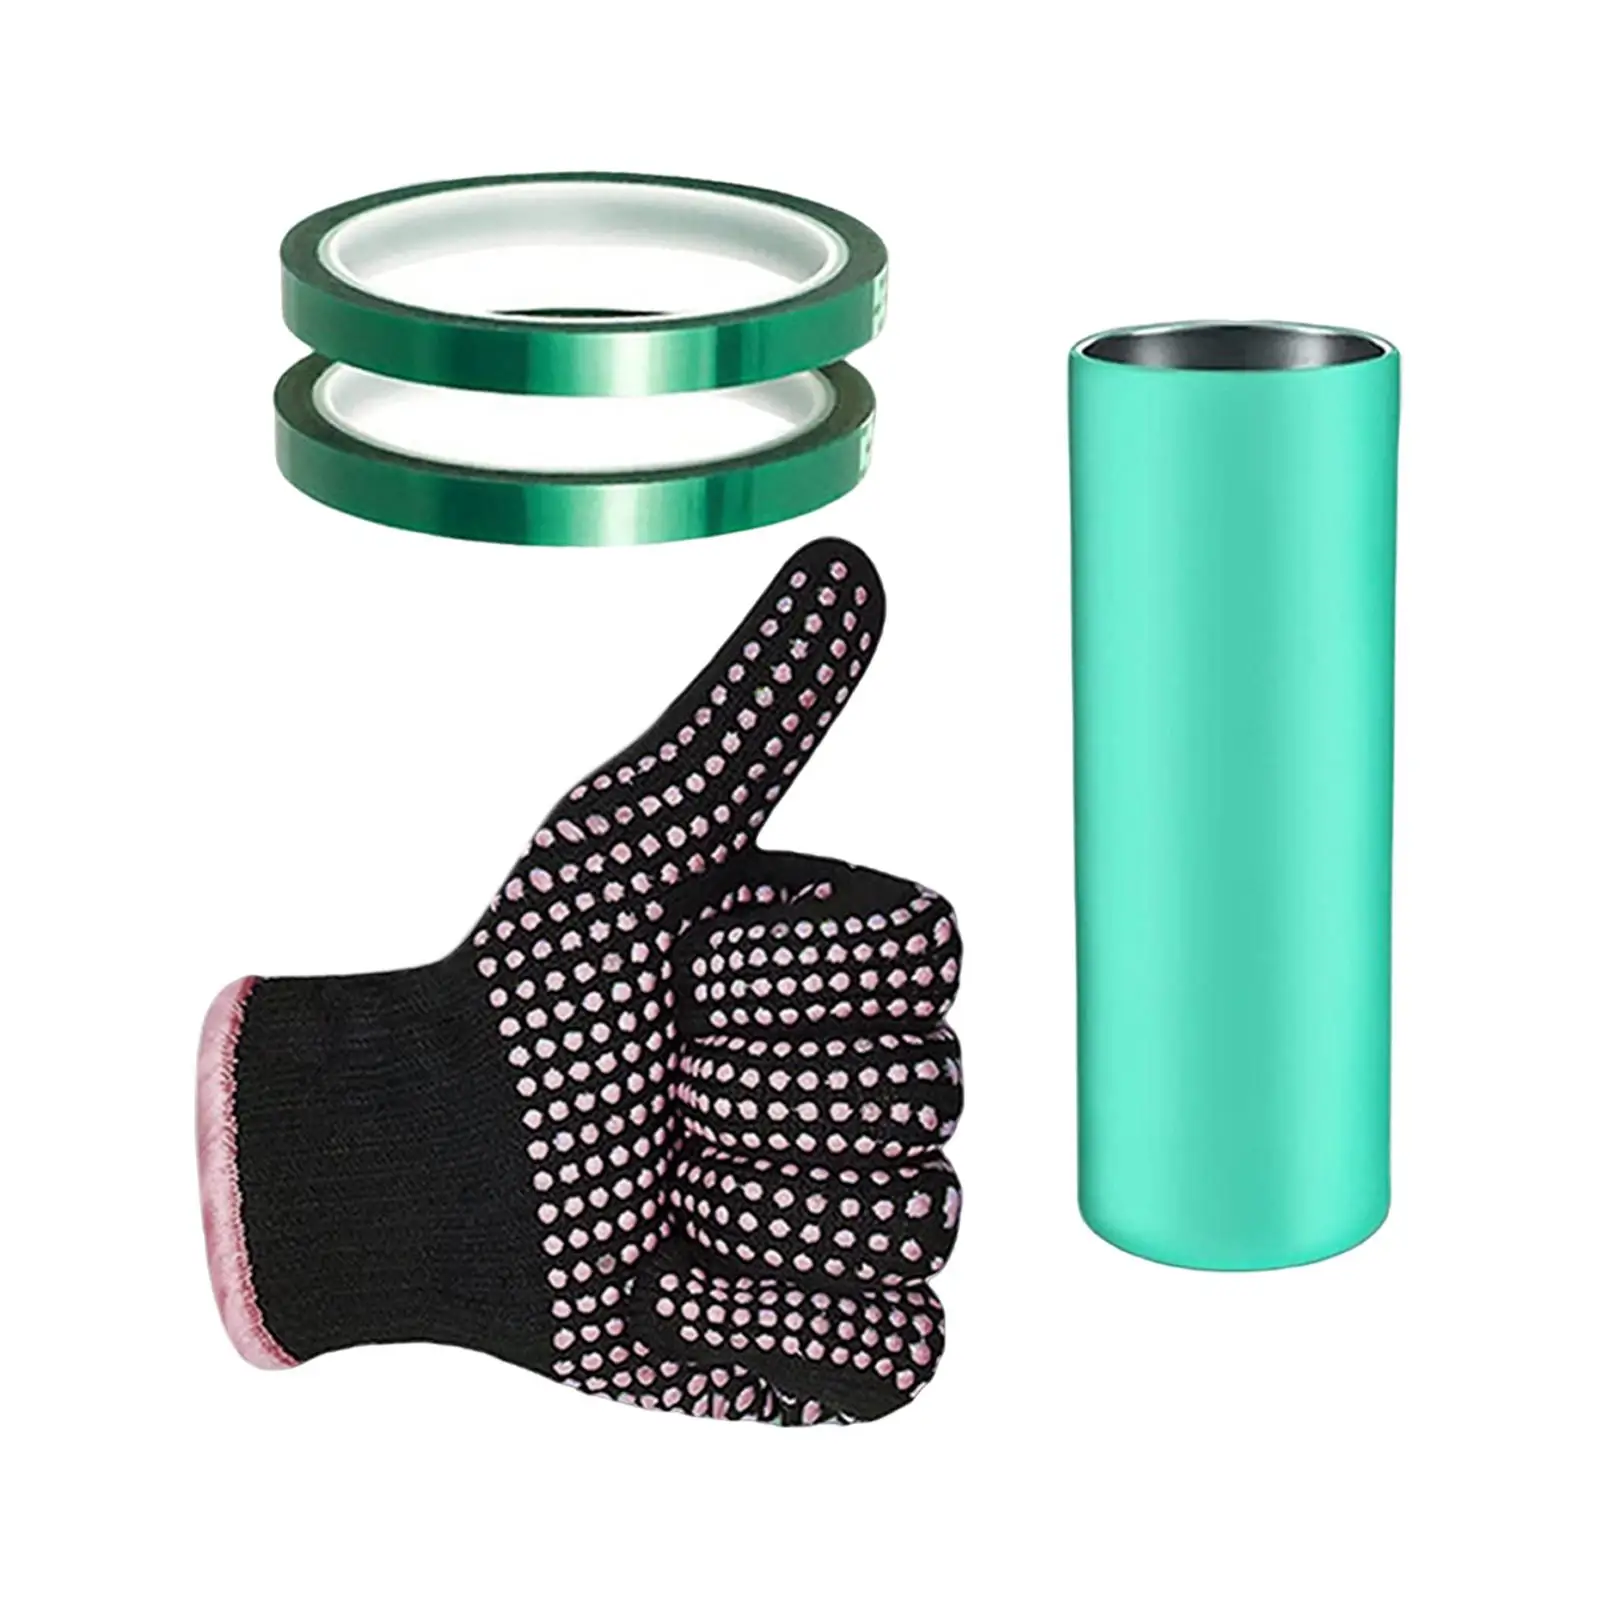  Silicone Bands Sleeve Kit for Straight  Cup, , & Transfer Tapes Tumbler  Machine